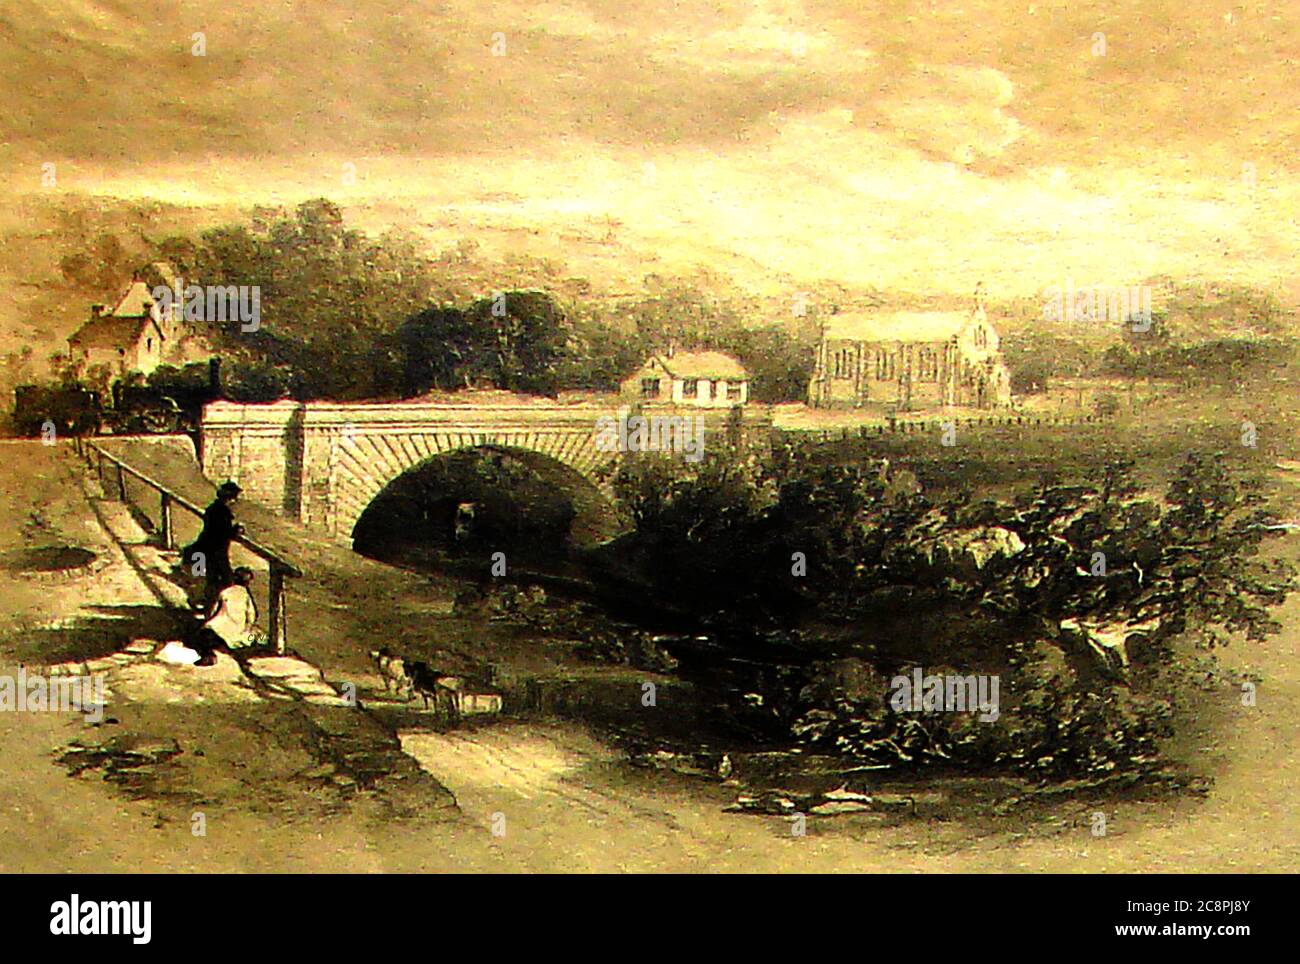 The Whitby and Pickering Railway (W&P)  -An historic old print of a scene near Grosmont village, North Yorkshire showing the village church, school and old railway bridge with a train and carriage at Grosmont, North Yorkshire UK. Below the two people in the picture can be seen a dog cart pulled by two dogs. Stock Photo